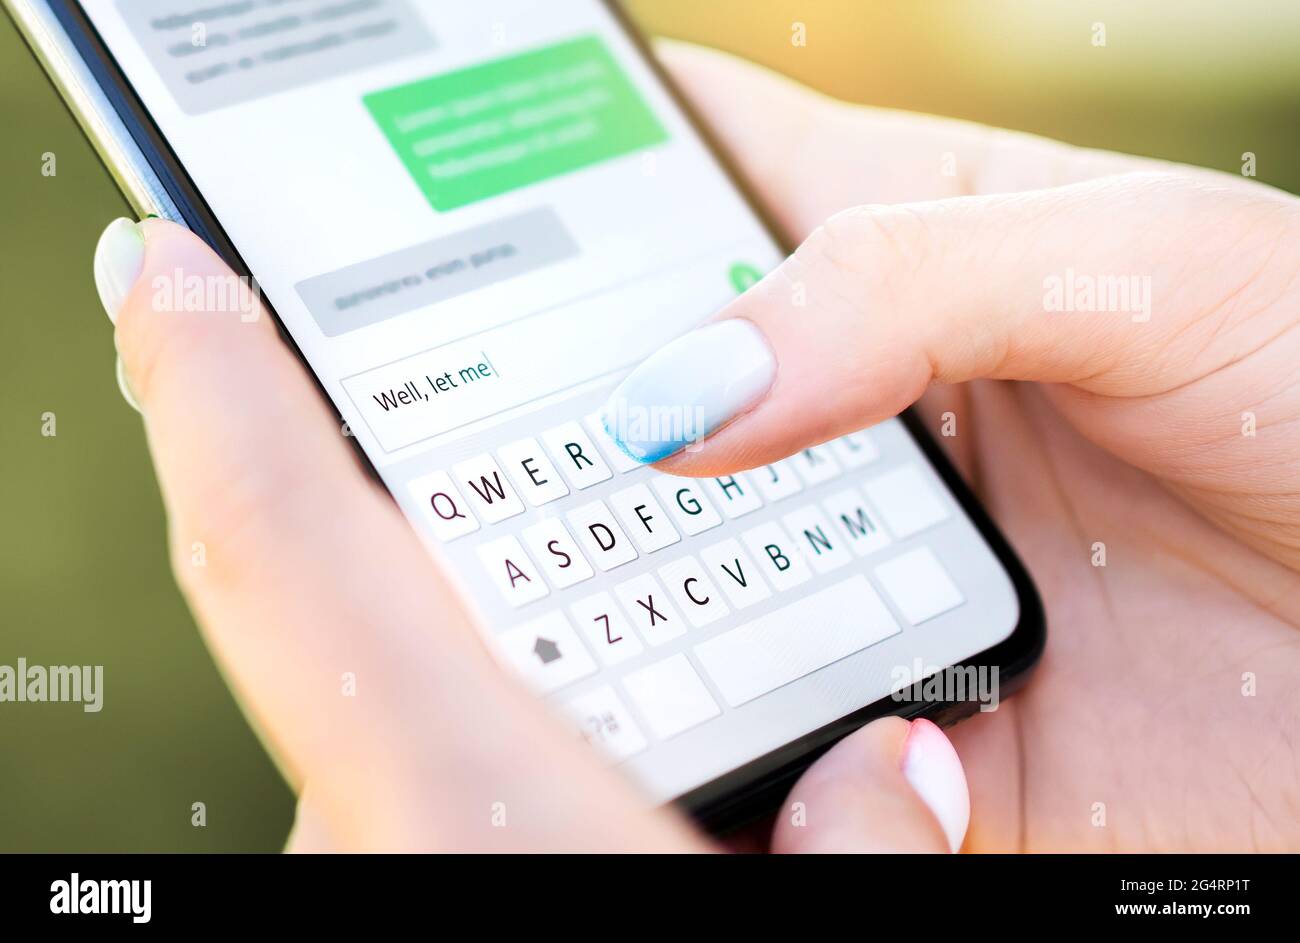 Text message with mobile phone. Woman texting sms with smartphone Catfish or digital scam. Screen keyboard in instant messaging chat. Macro close up. Stock Photo